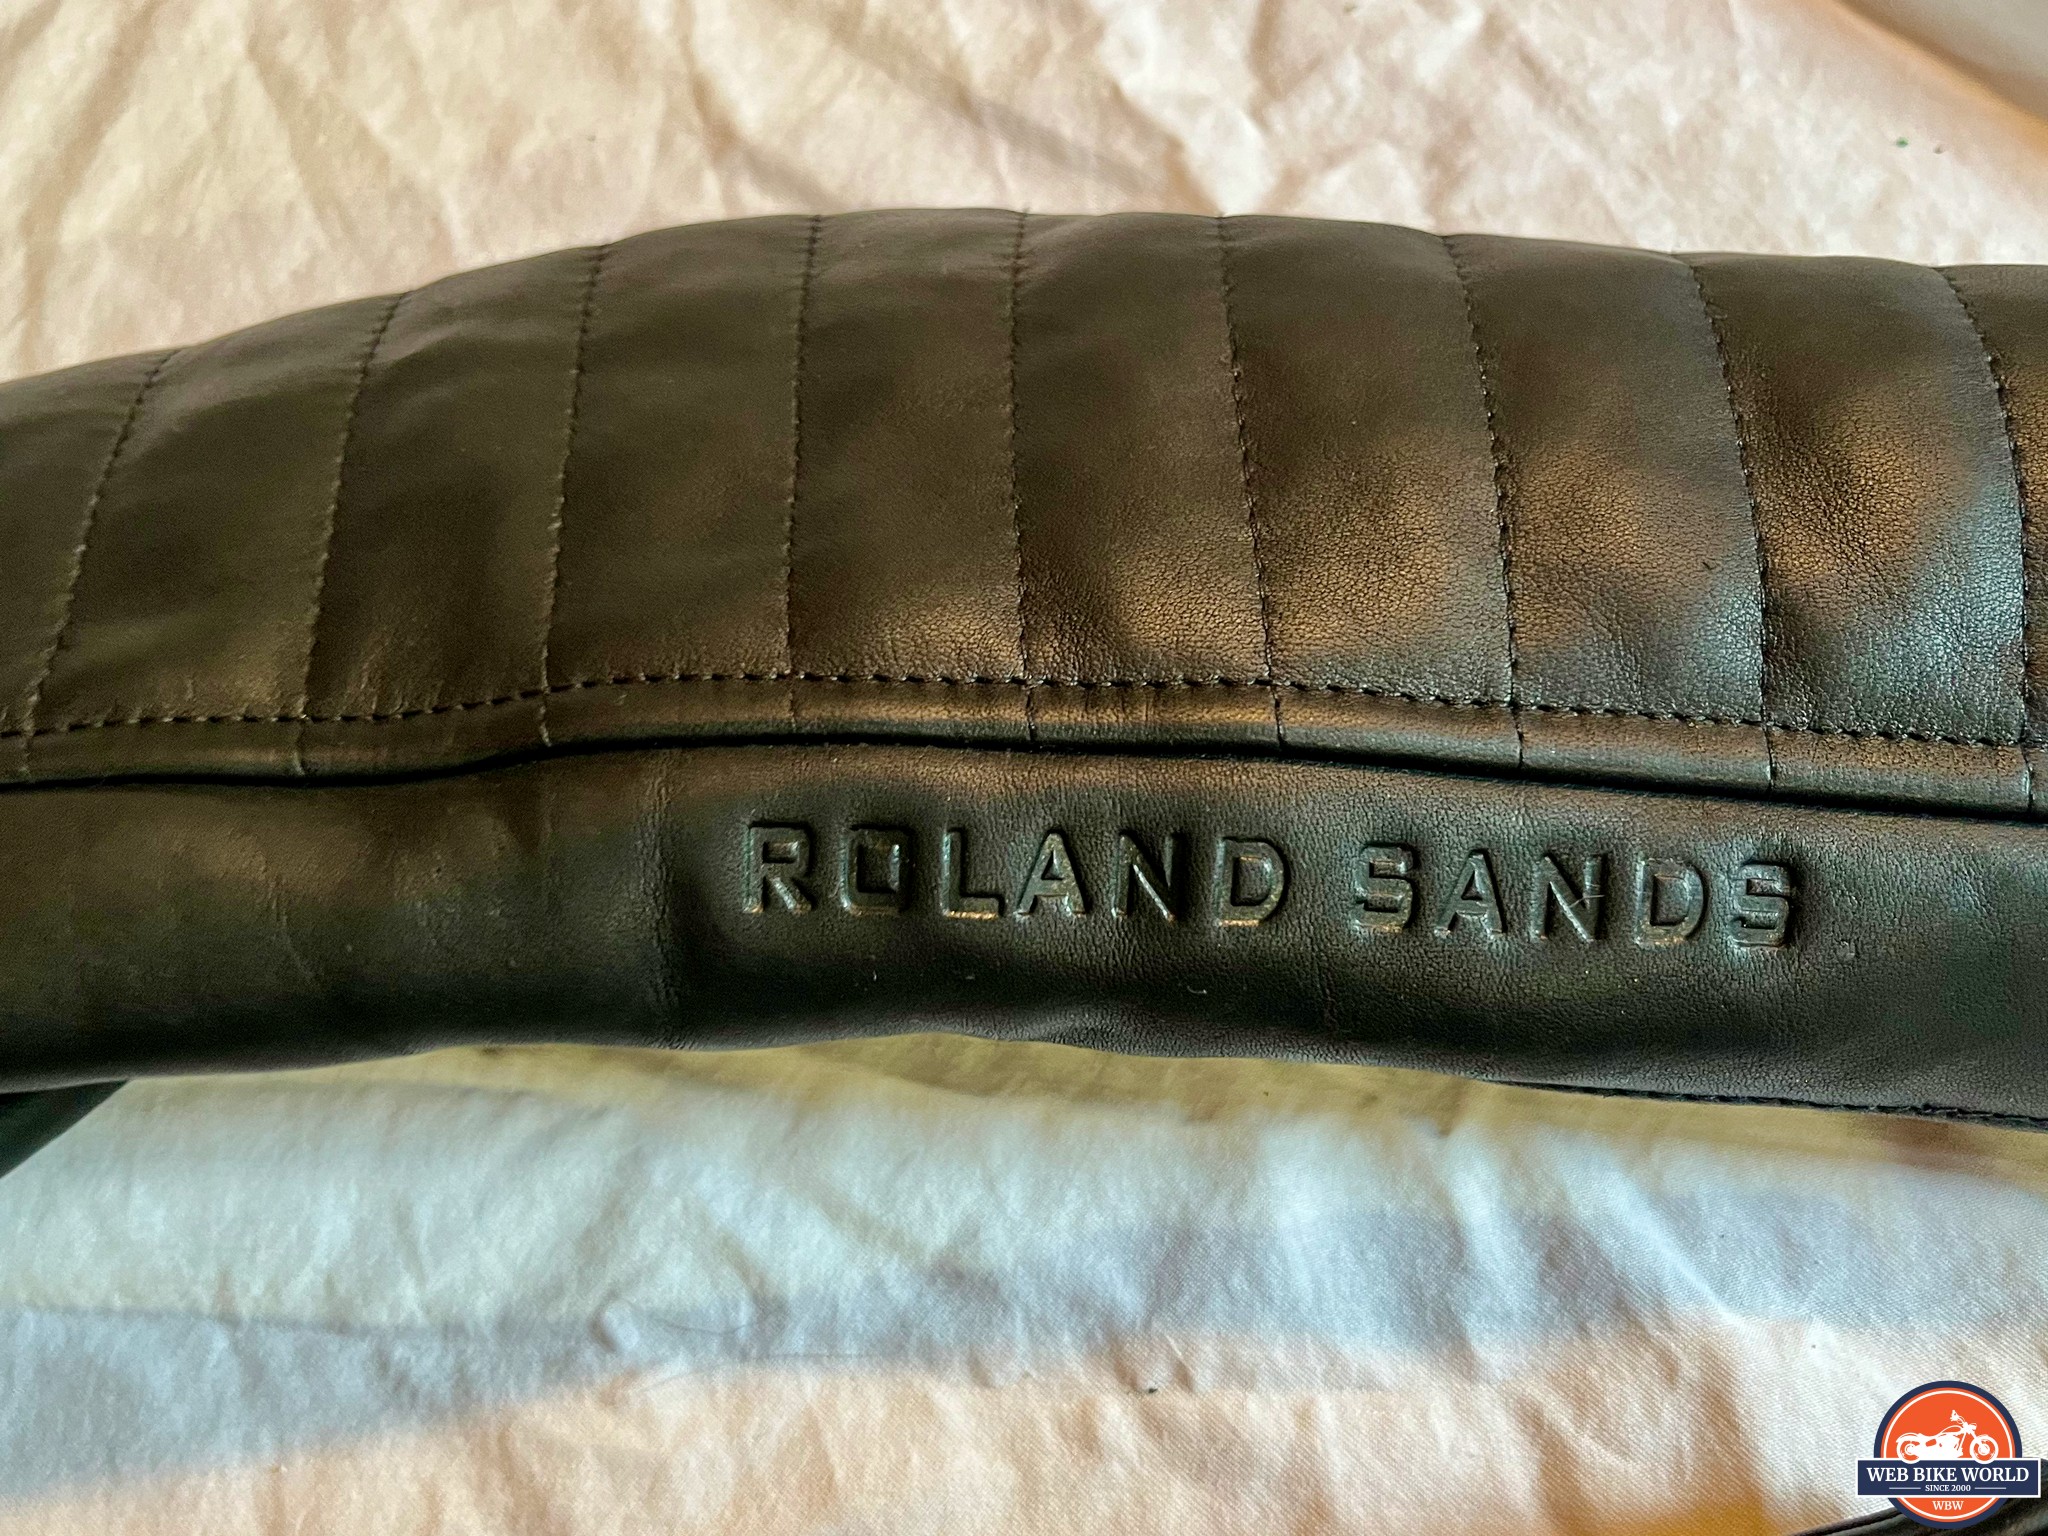 Closeup of the RSD stitching on the jacket arm